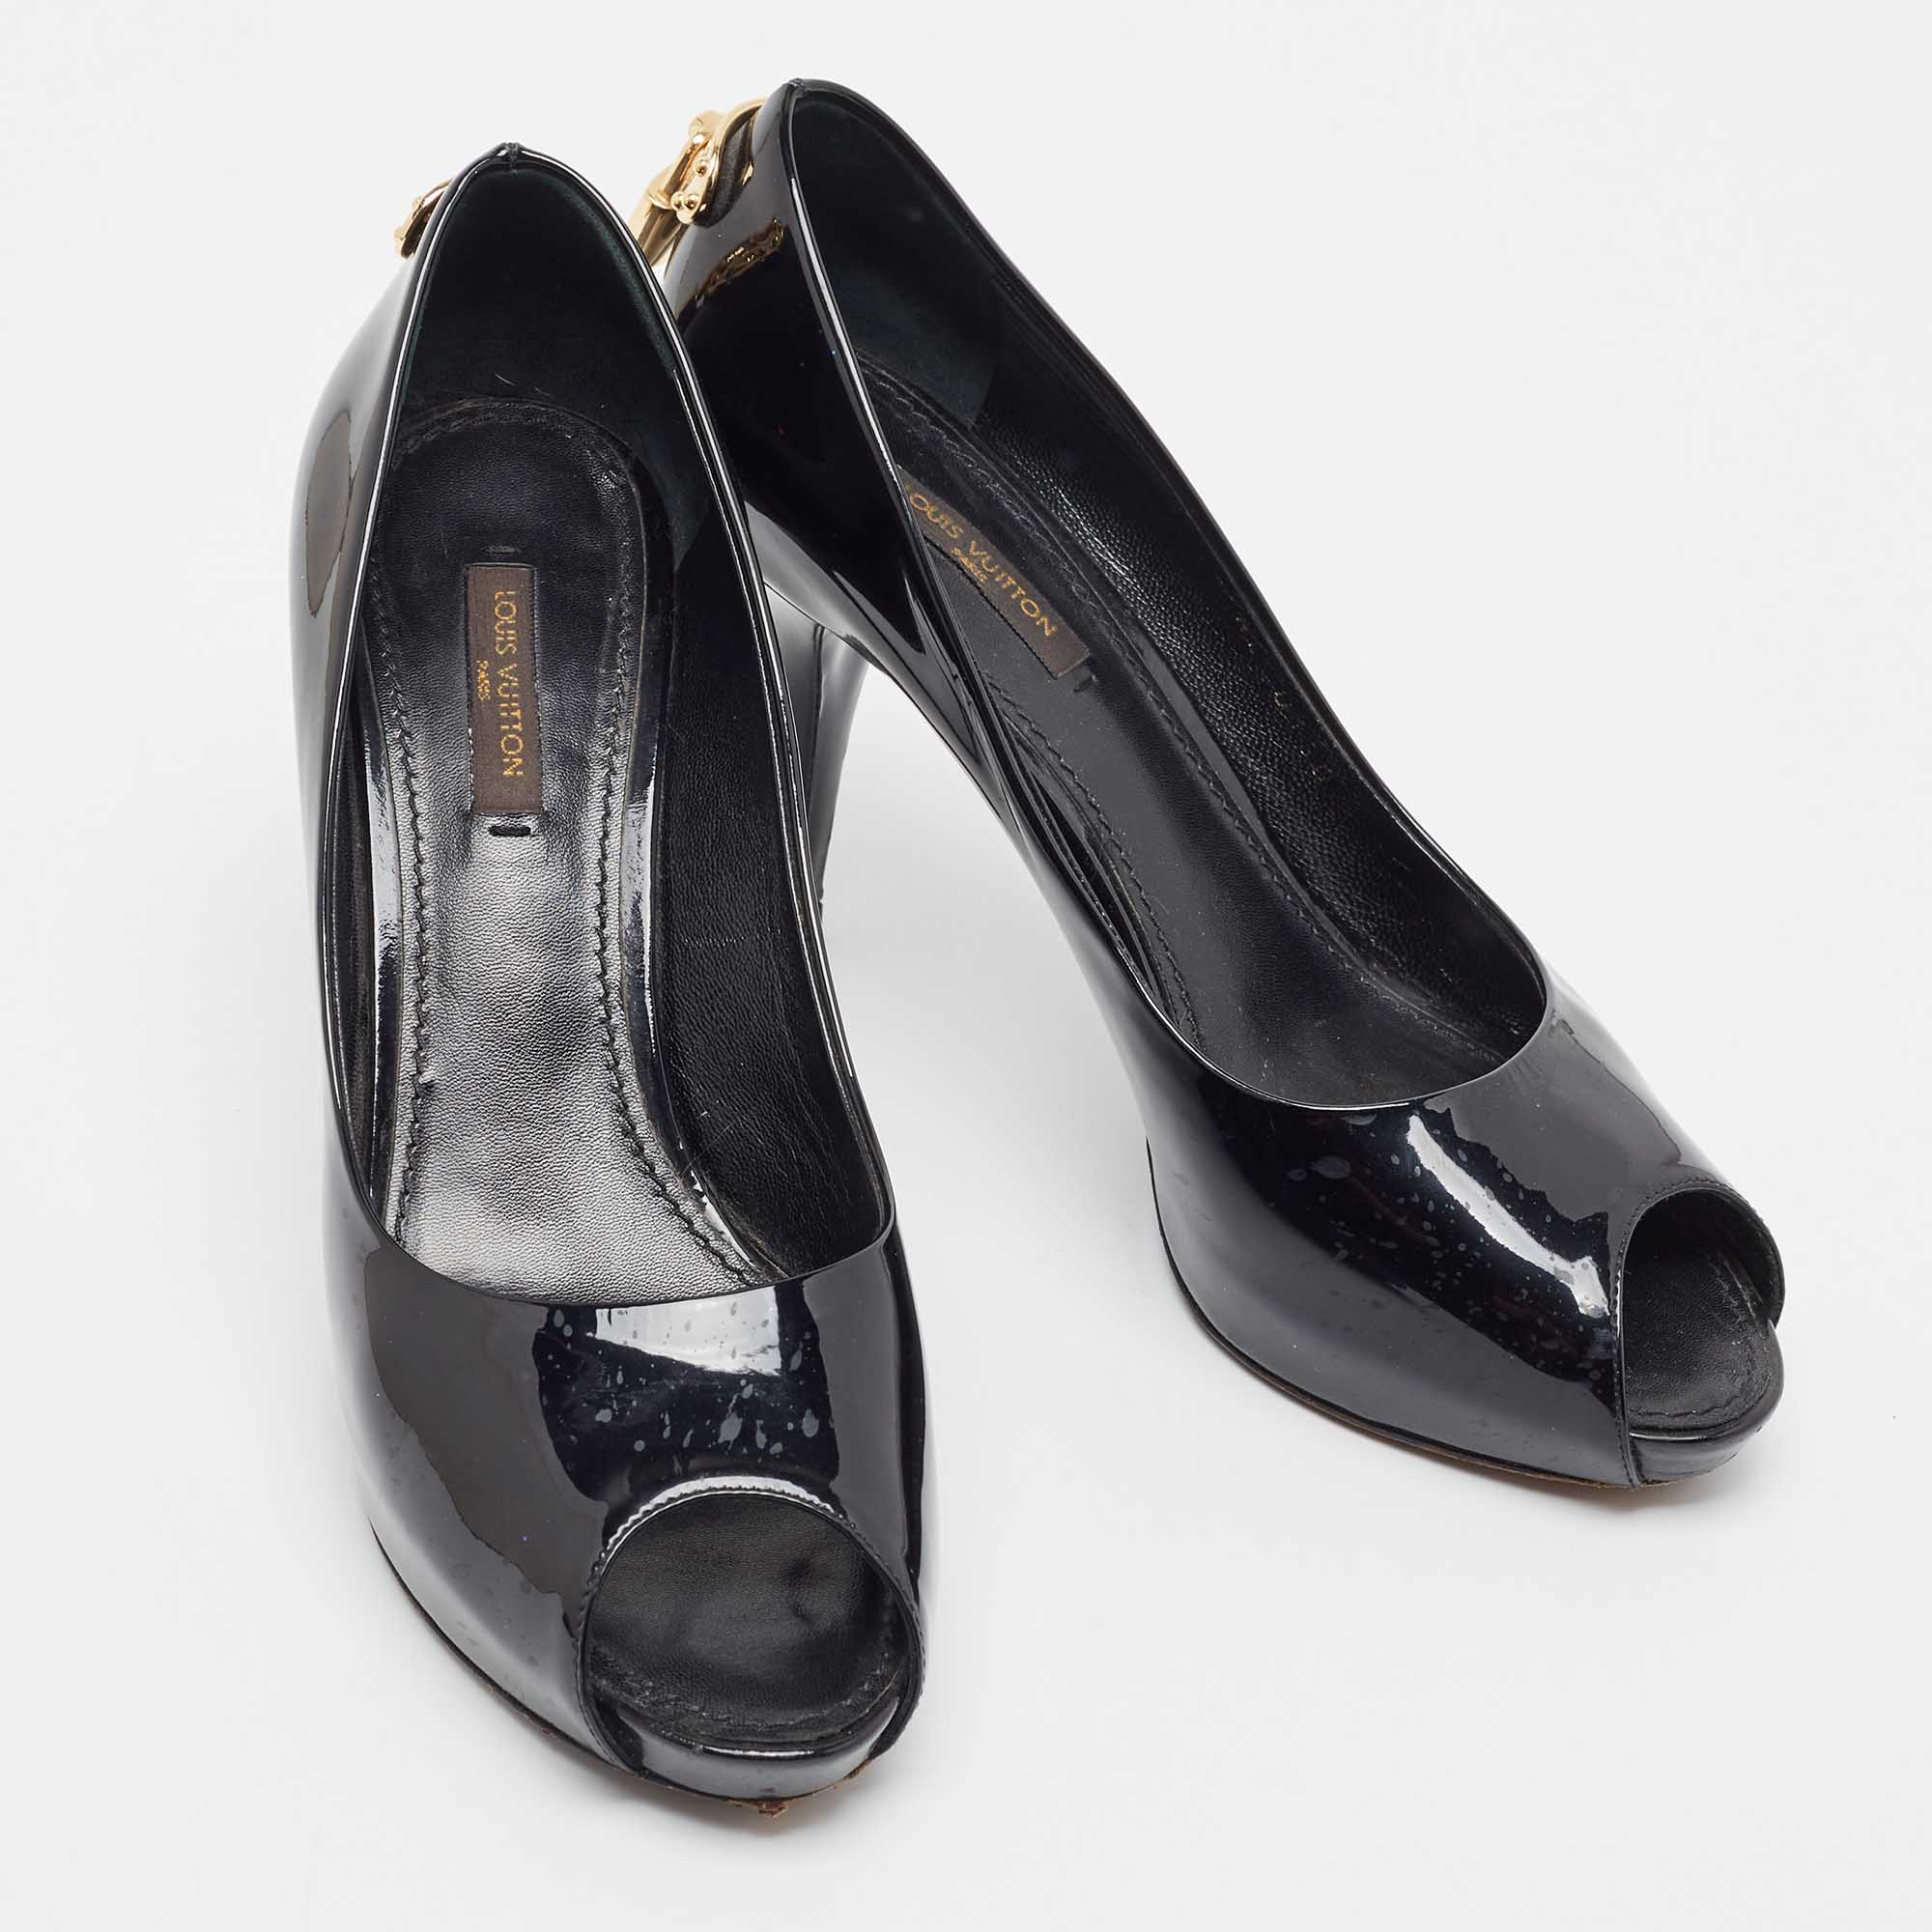 Louis Vuitton Black Patent Leather Oh Really! Peep Toe Pumps Size 37